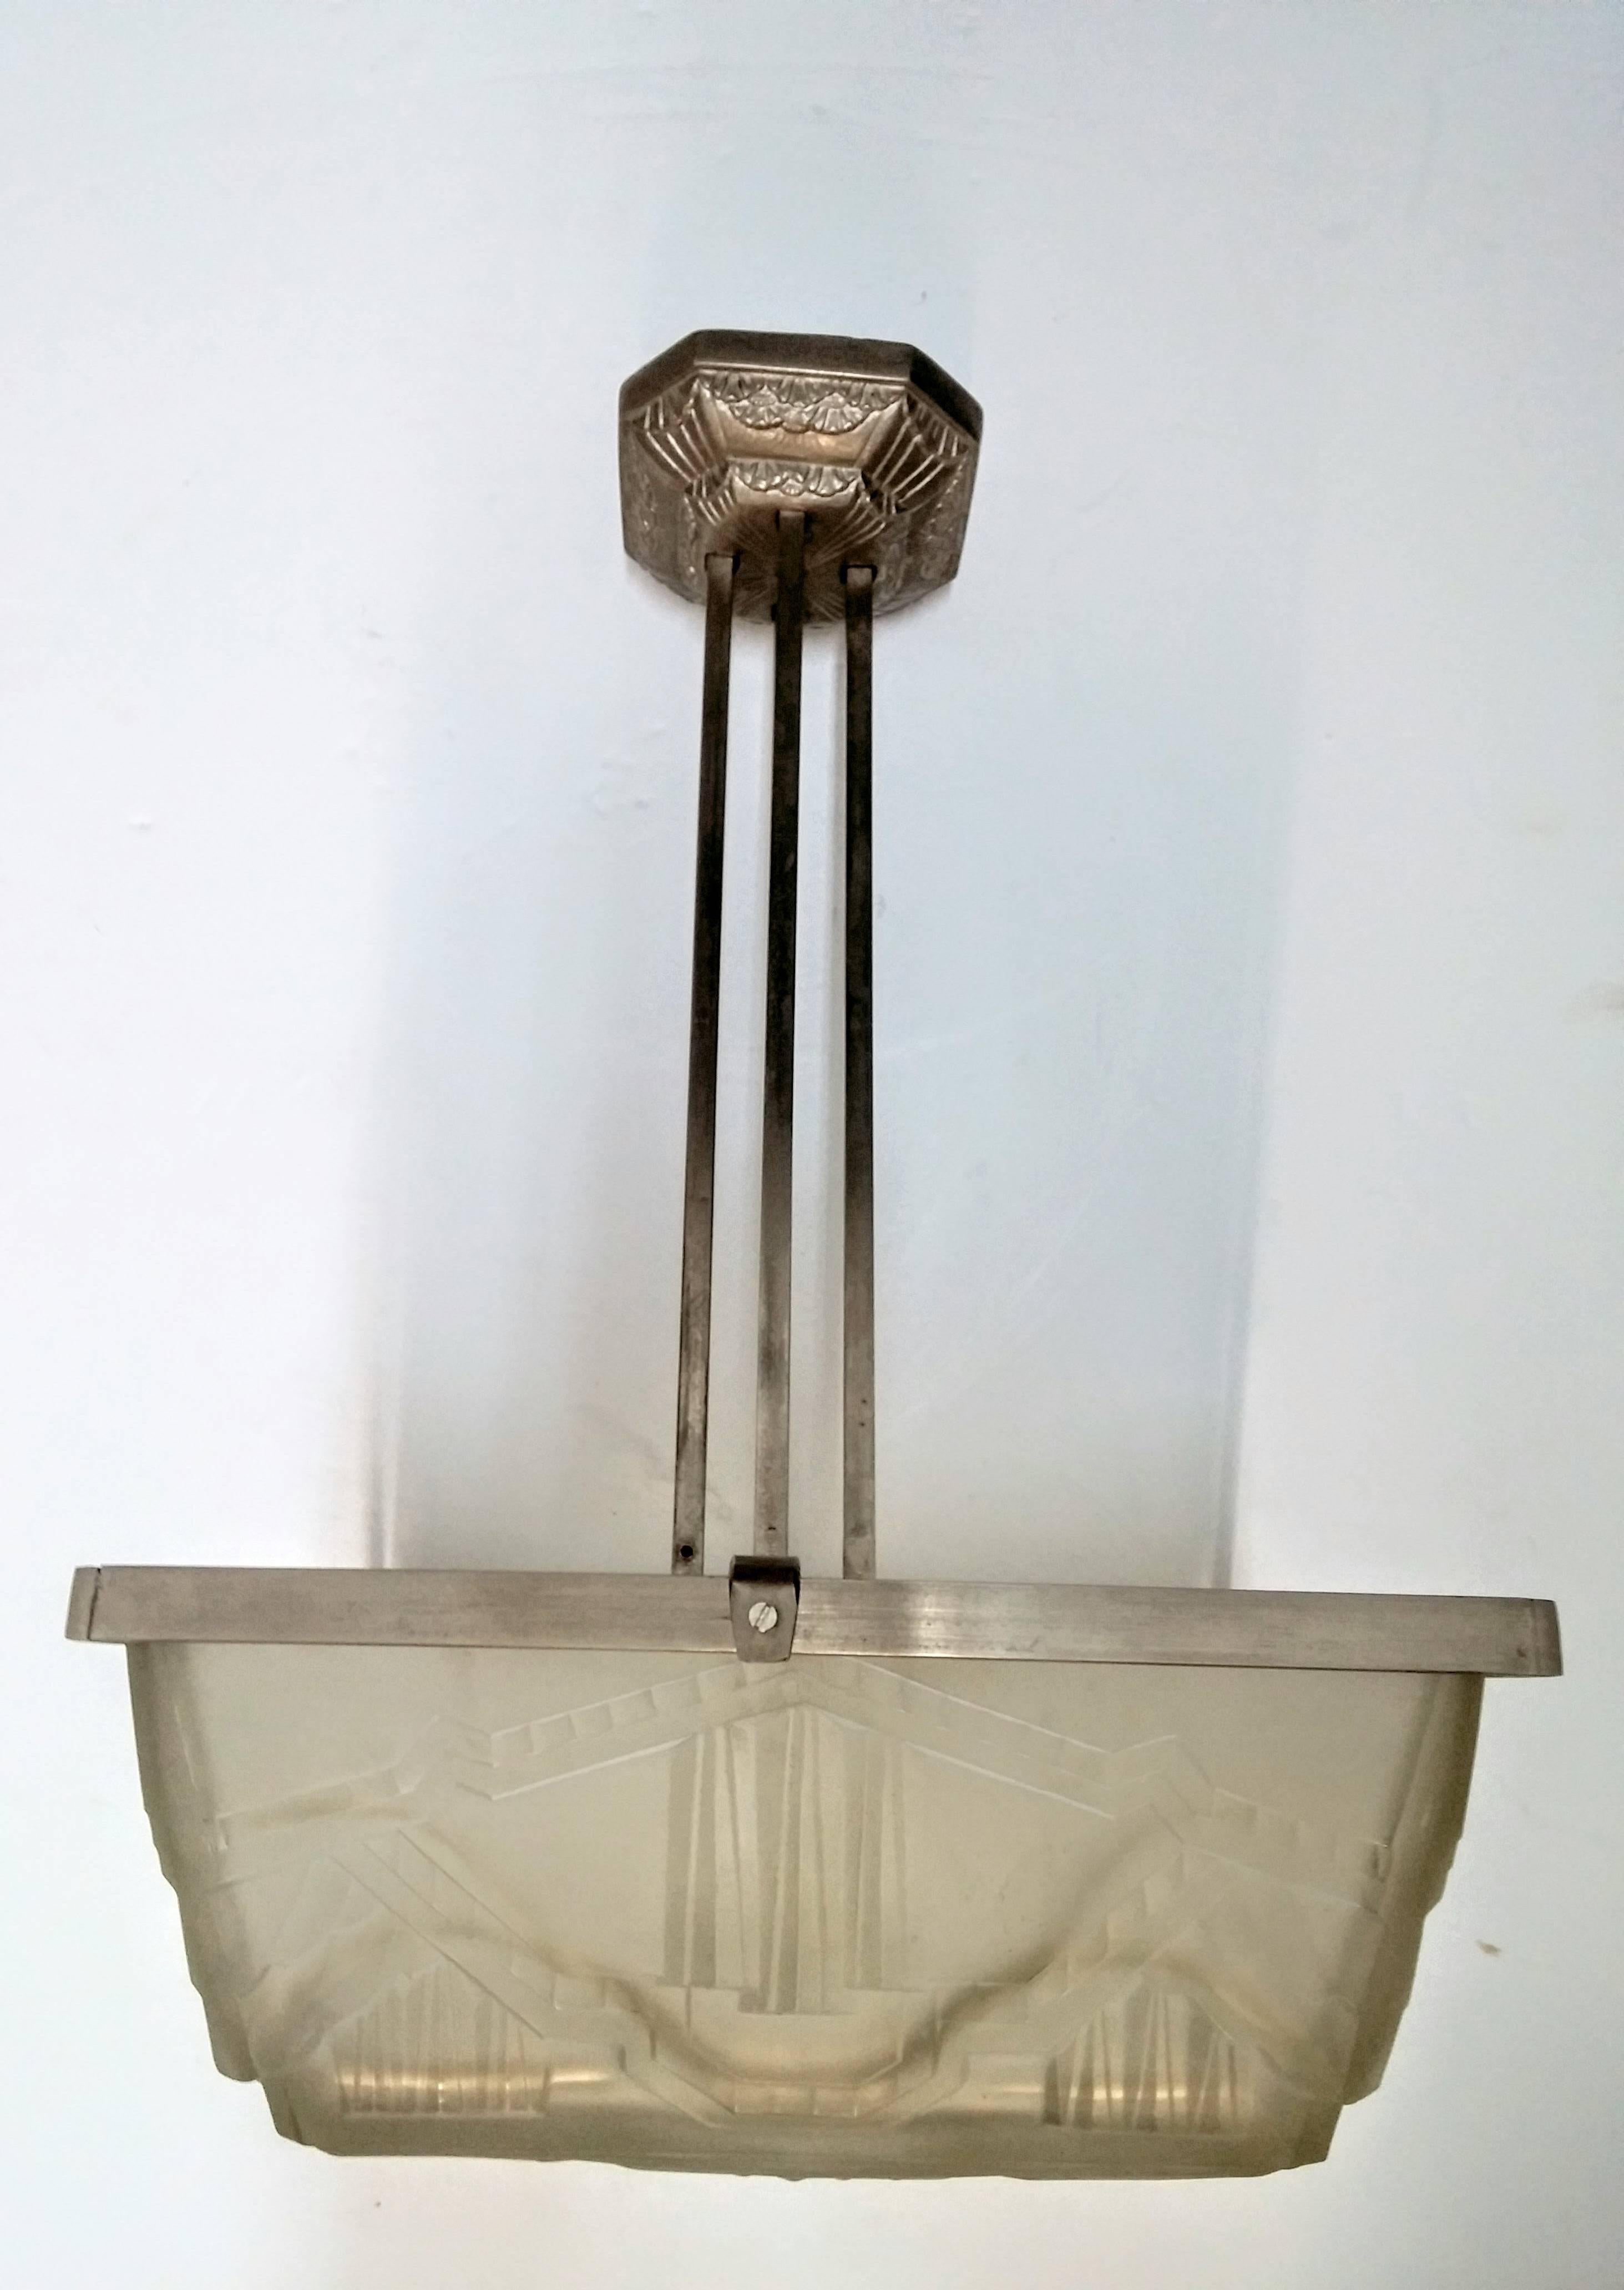 
A stunning rare French Art Deco square shaped pendant chandelier was attributed to the French artist 